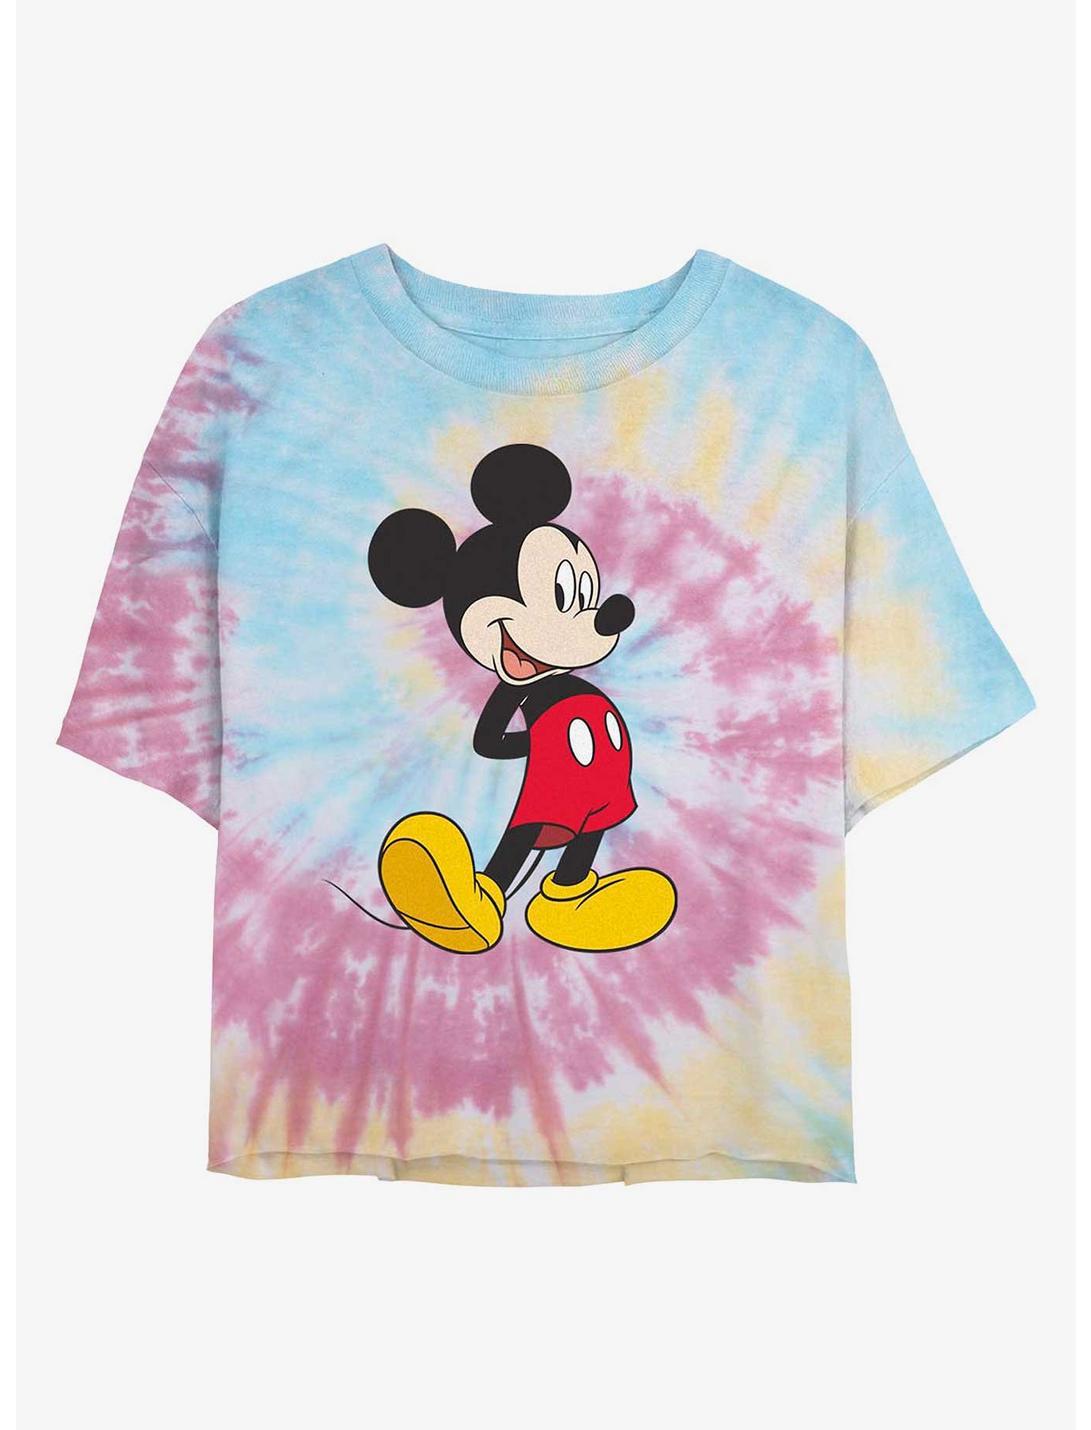 Disney Mickey Mouse Traditional Mickey Tie Dye Crop Girls T-Shirt, BLUPNKLY, hi-res